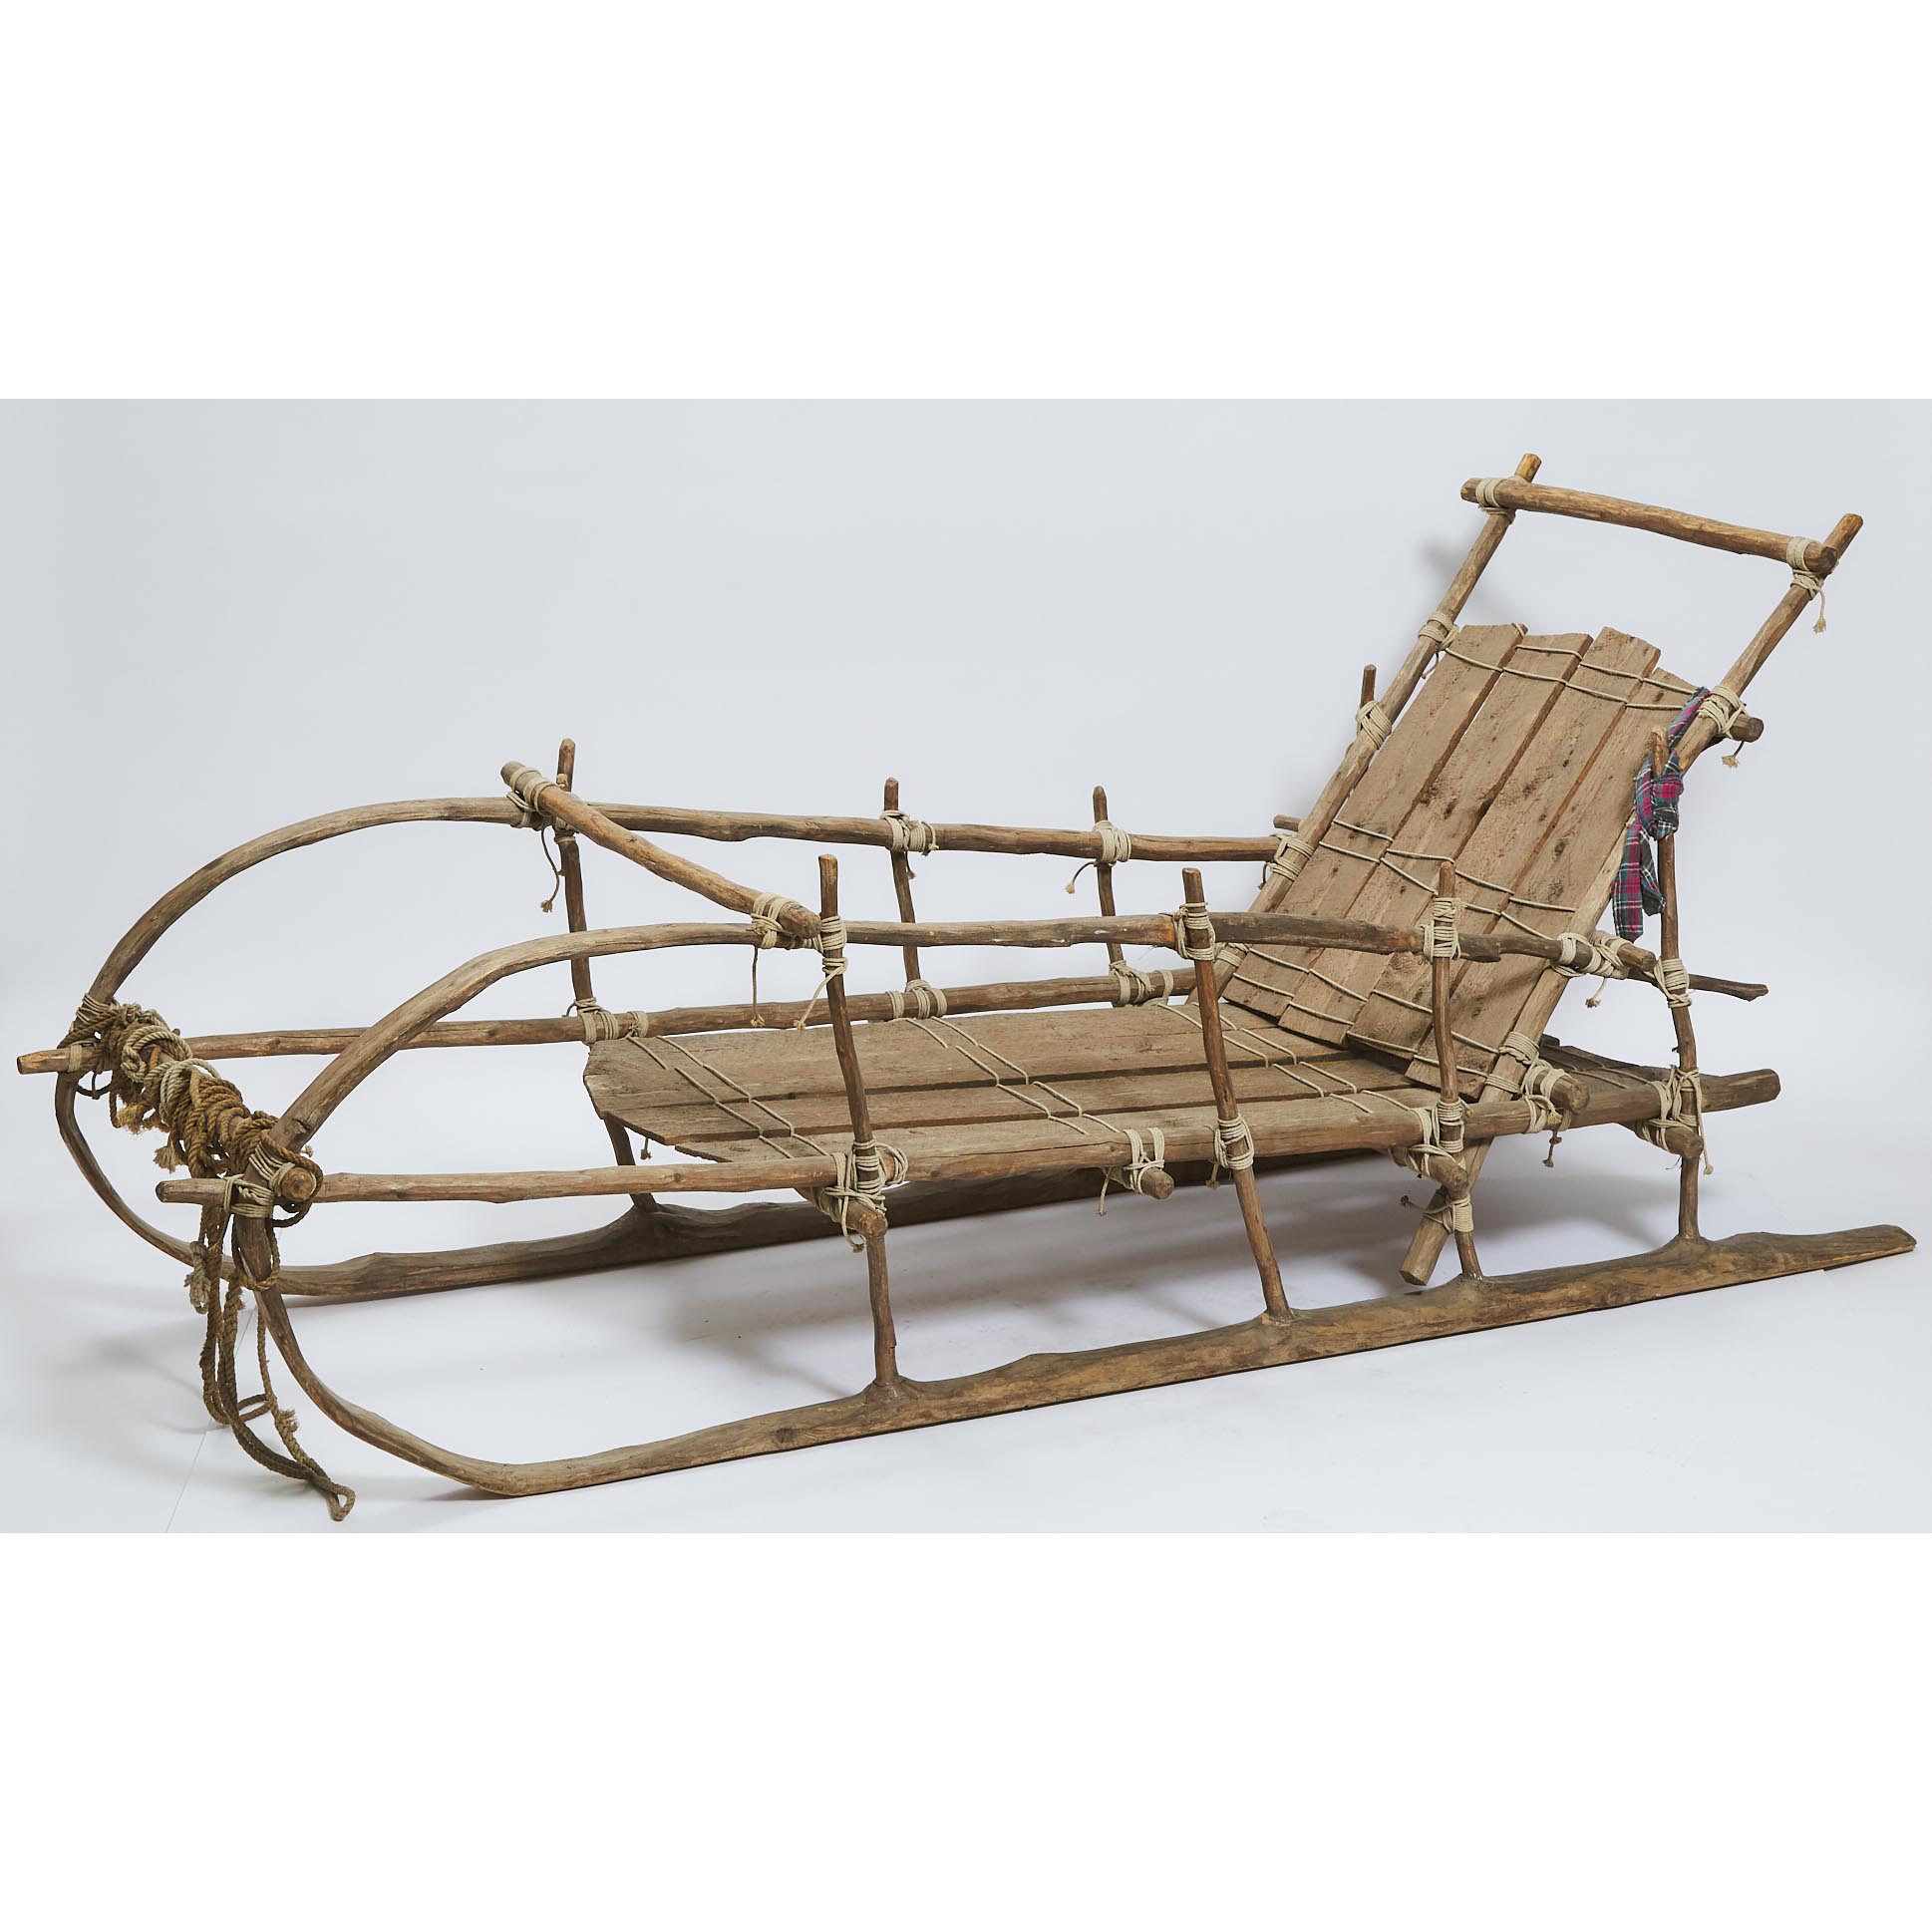 Athabascan Bent Spruce Dog Sled, late 19th/early 20th century